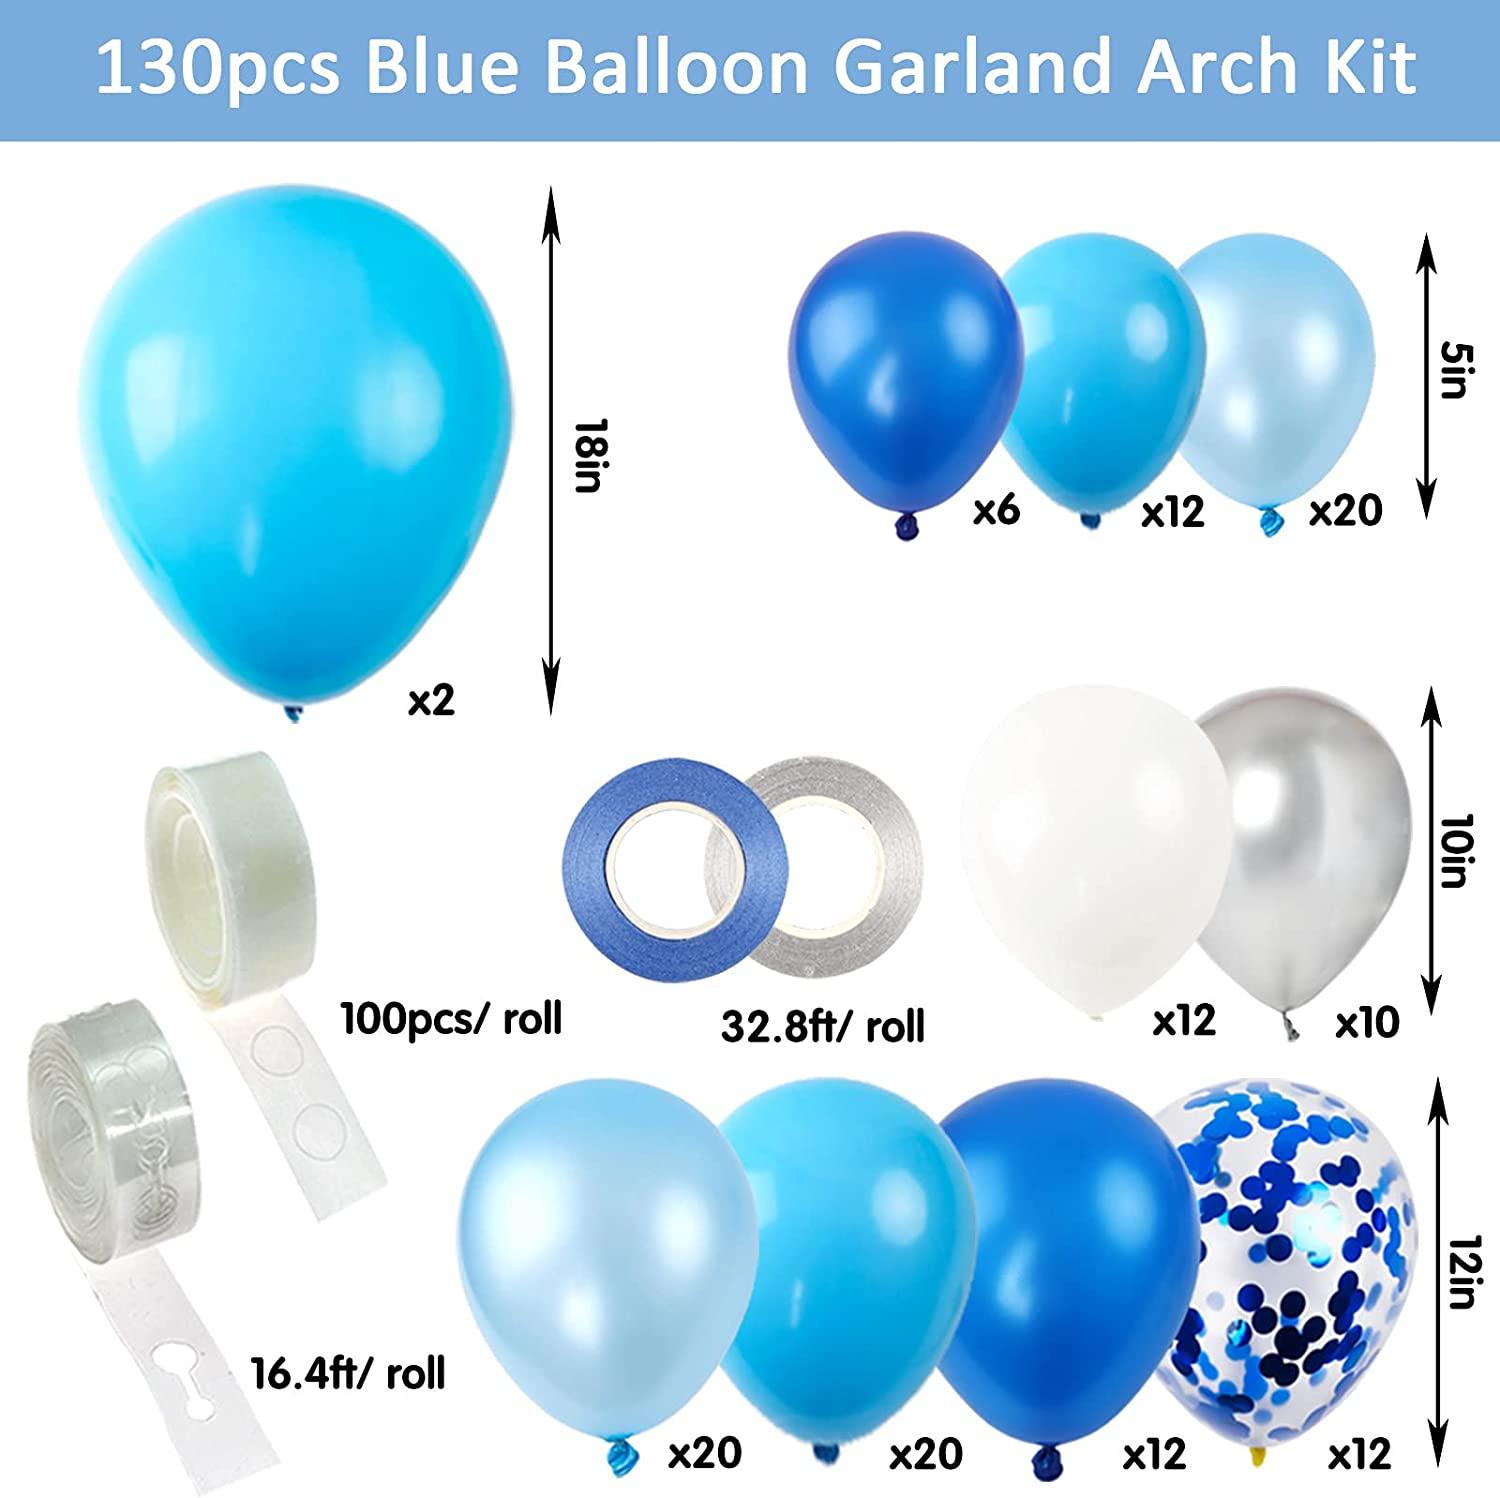 130pcs Blue Balloons Garland Arch Kit, Royal Blue and Baby Blue White Chrome Sliver Balloons Arch for Shower Birthday Graduation Party Decorations - Lasercutwraps Shop